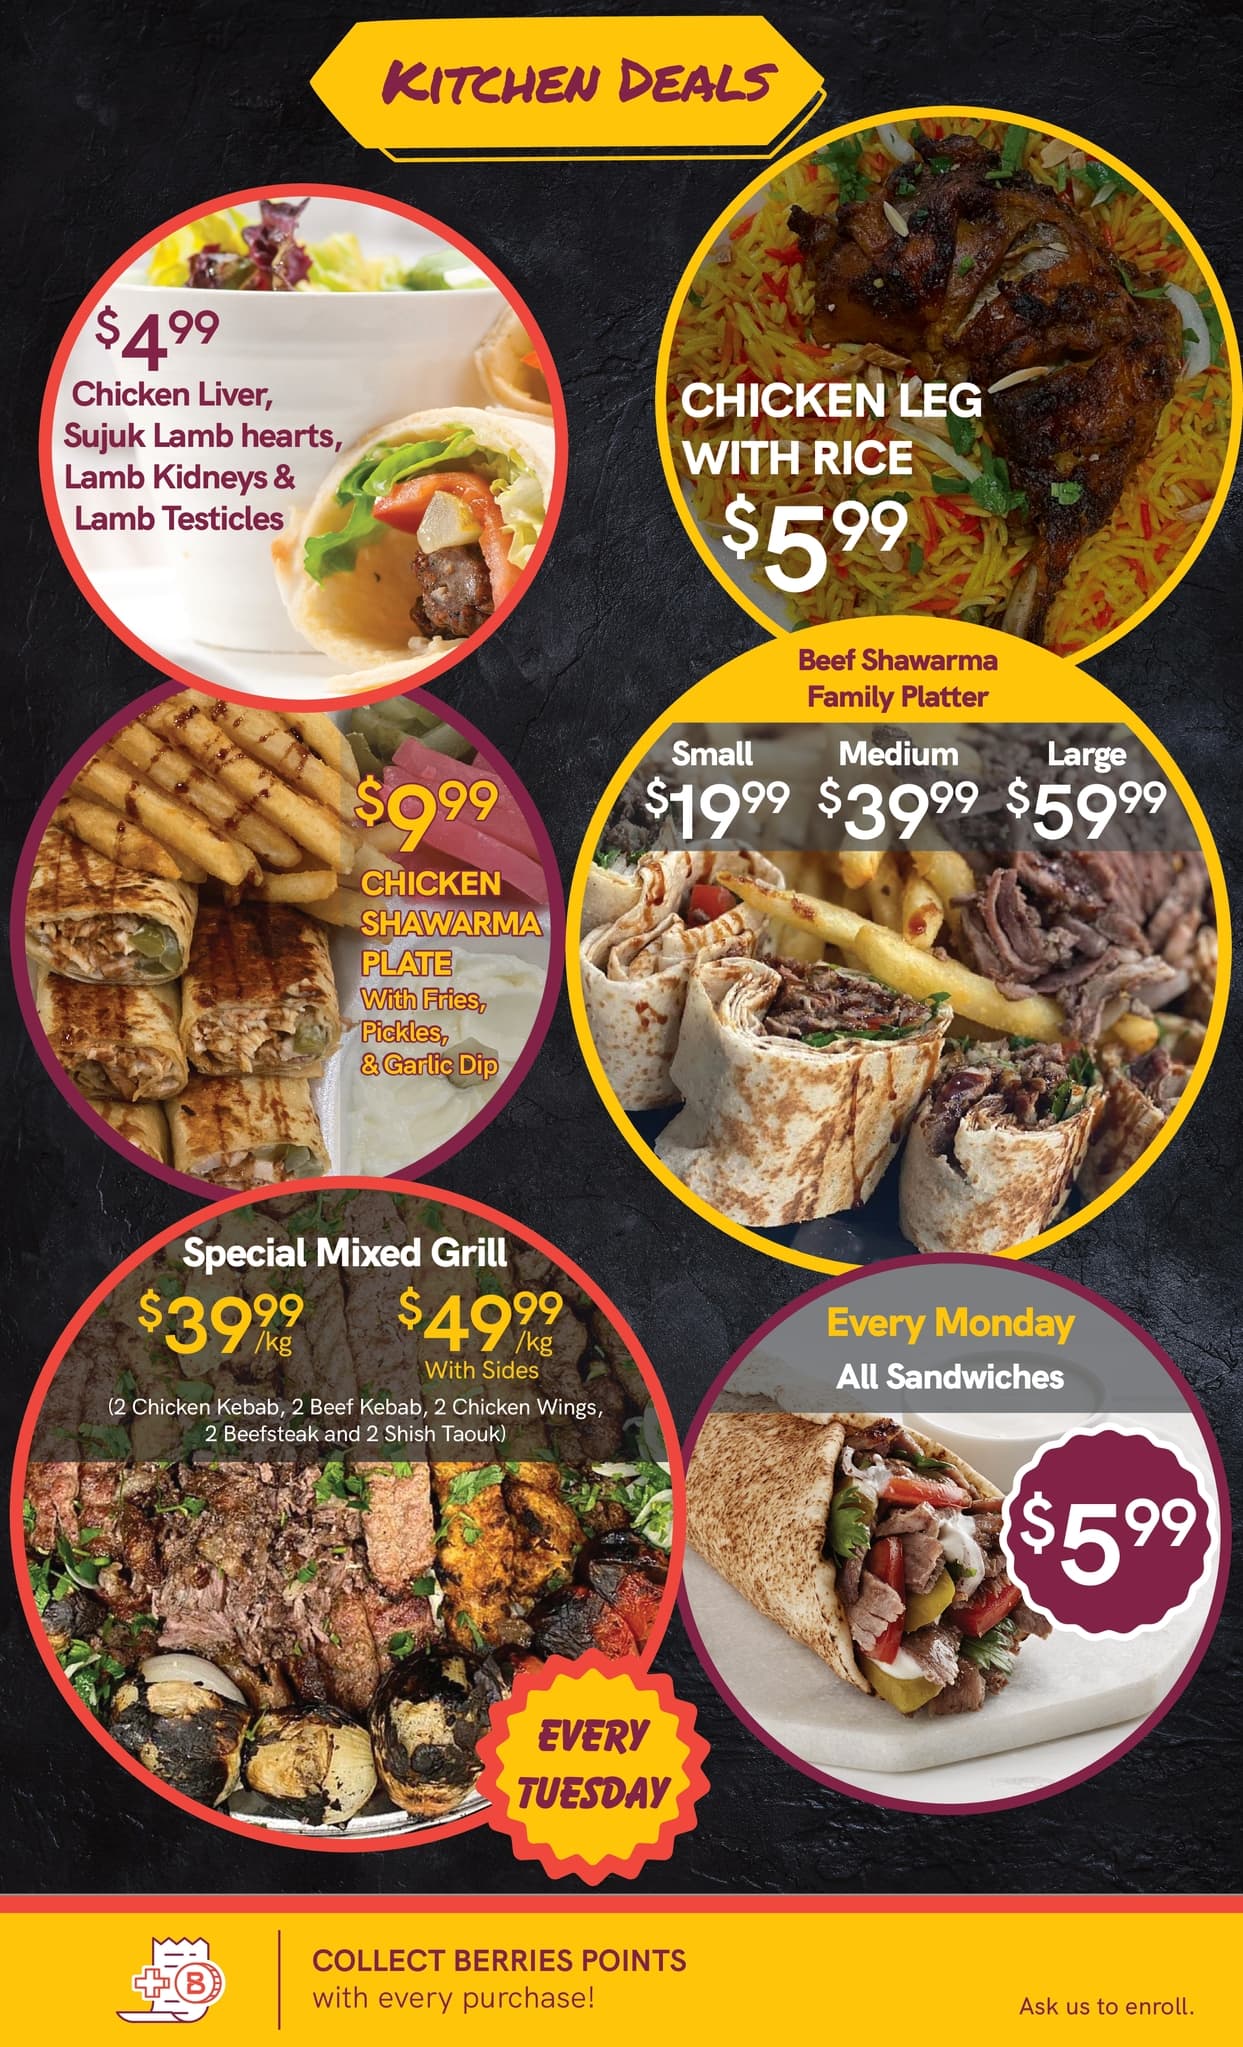 Berries Market - Weekly Flyer Specials - Page 4